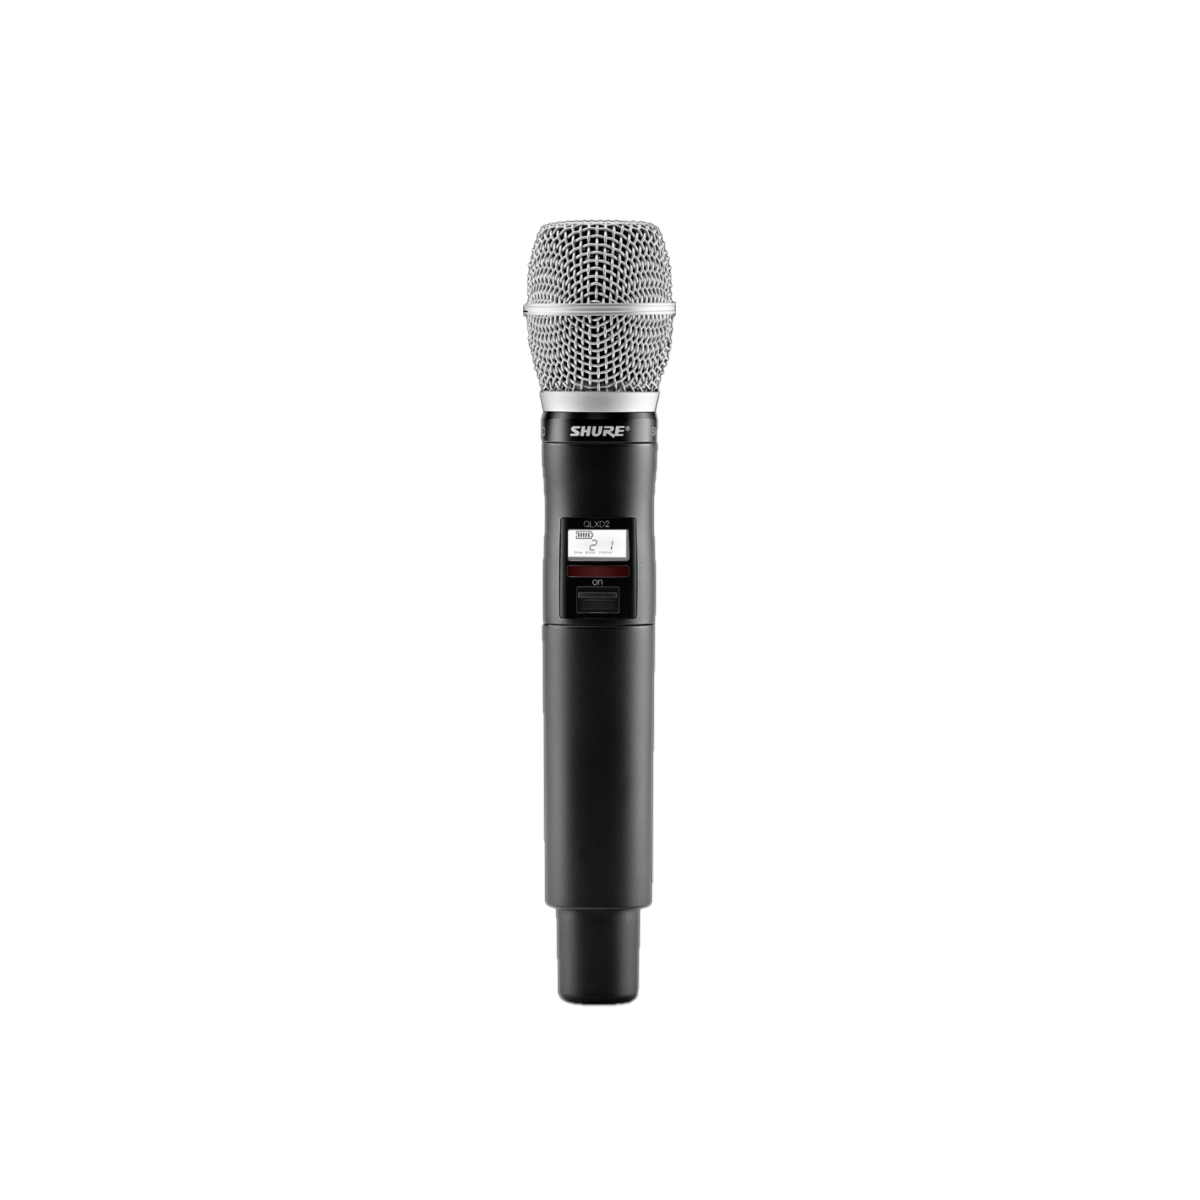 QLXD2/SM86=-H50 Handheld Transmitter with SM86 Microphone